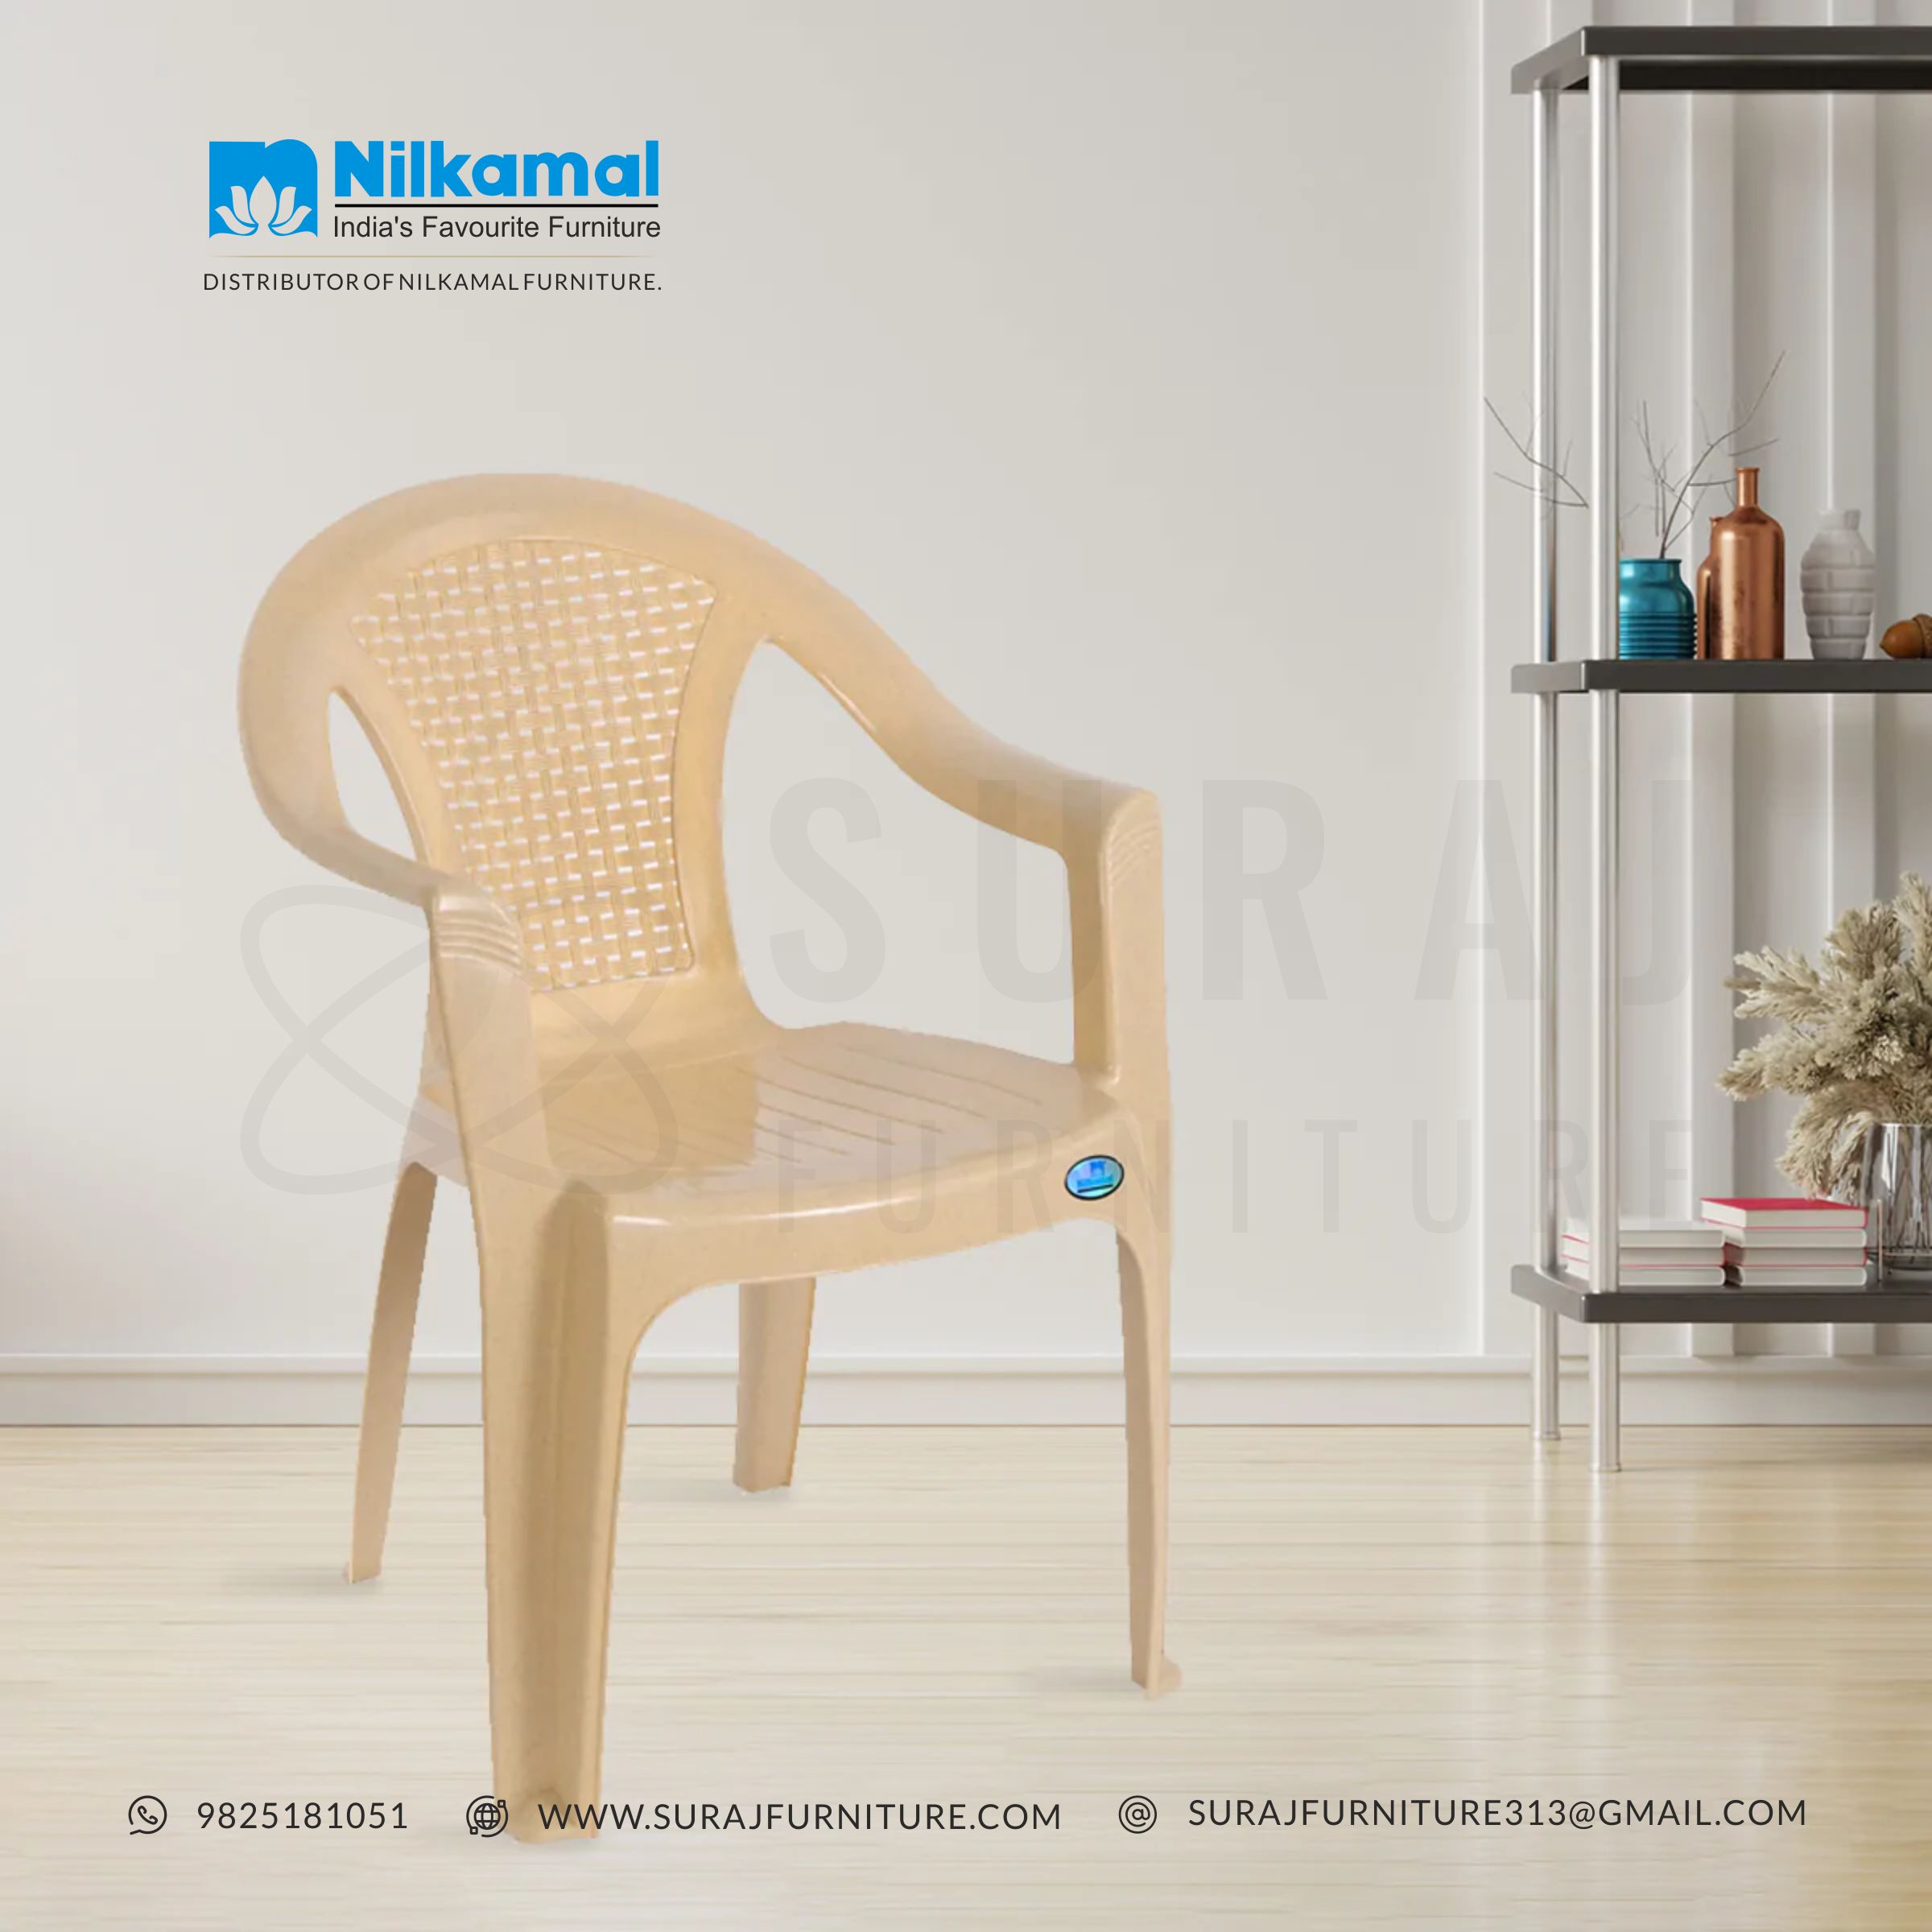 plastic chairs online